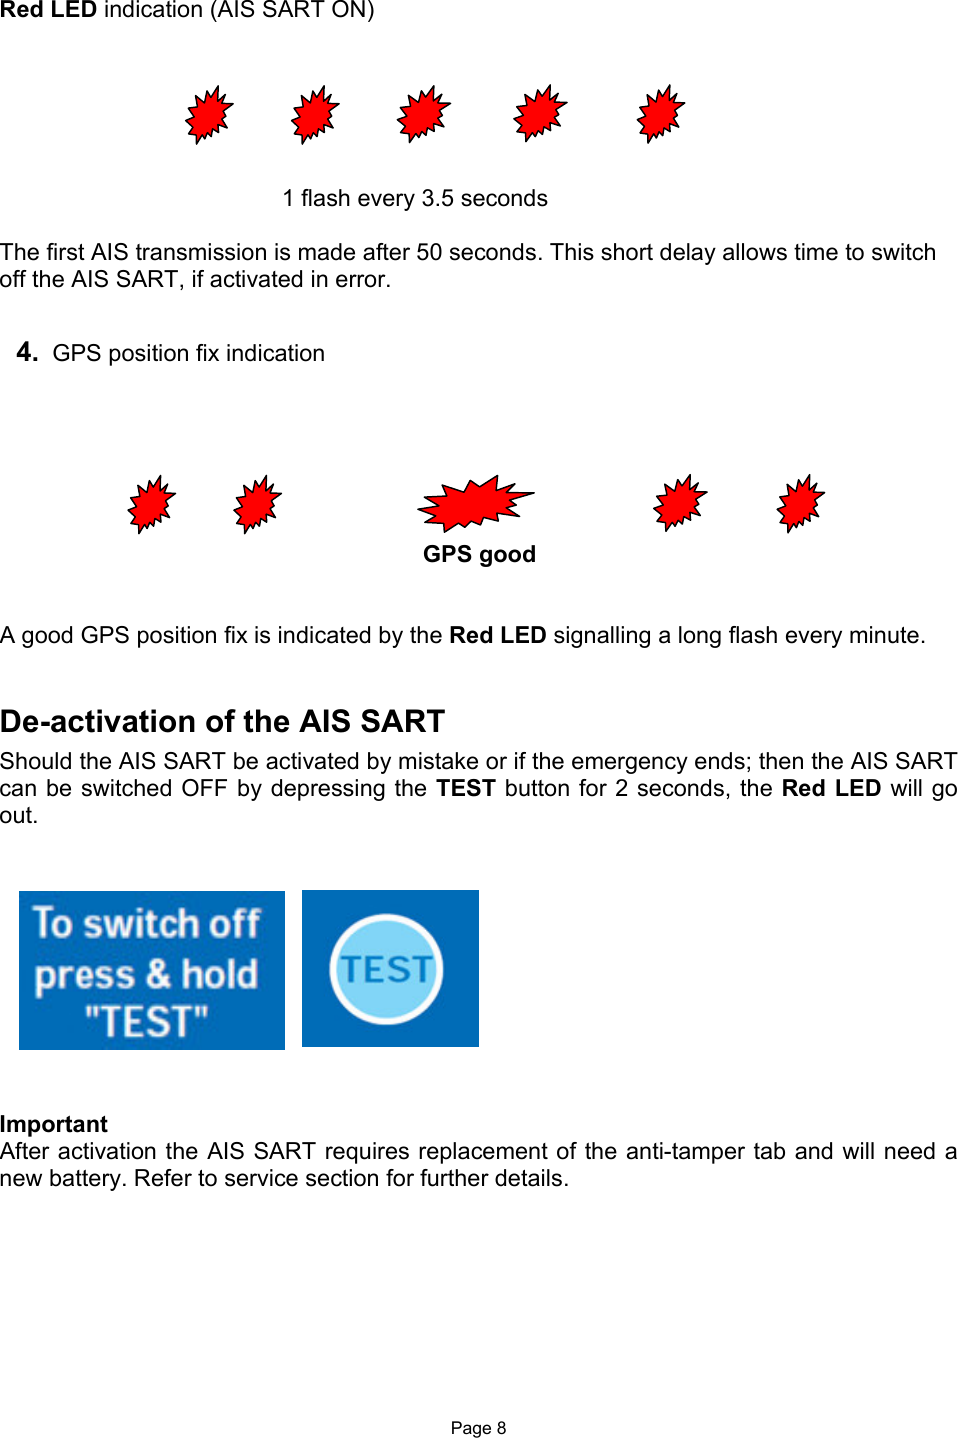  Page 8 Red LED indication (AIS SART ON)       1 flash every 3.5 seconds  The first AIS transmission is made after 50 seconds. This short delay allows time to switch off the AIS SART, if activated in error.            GPS good   A good GPS position fix is indicated by the Red LED signalling a long flash every minute.   De-activation of the AIS SART Should the AIS SART be activated by mistake or if the emergency ends; then the AIS SART can be switched OFF by depressing the TEST button for 2 seconds, the Red LED will go out.              Important After activation the AIS SART requires replacement of the anti-tamper tab and will need a new battery. Refer to service section for further details.  4.  GPS position fix indication   